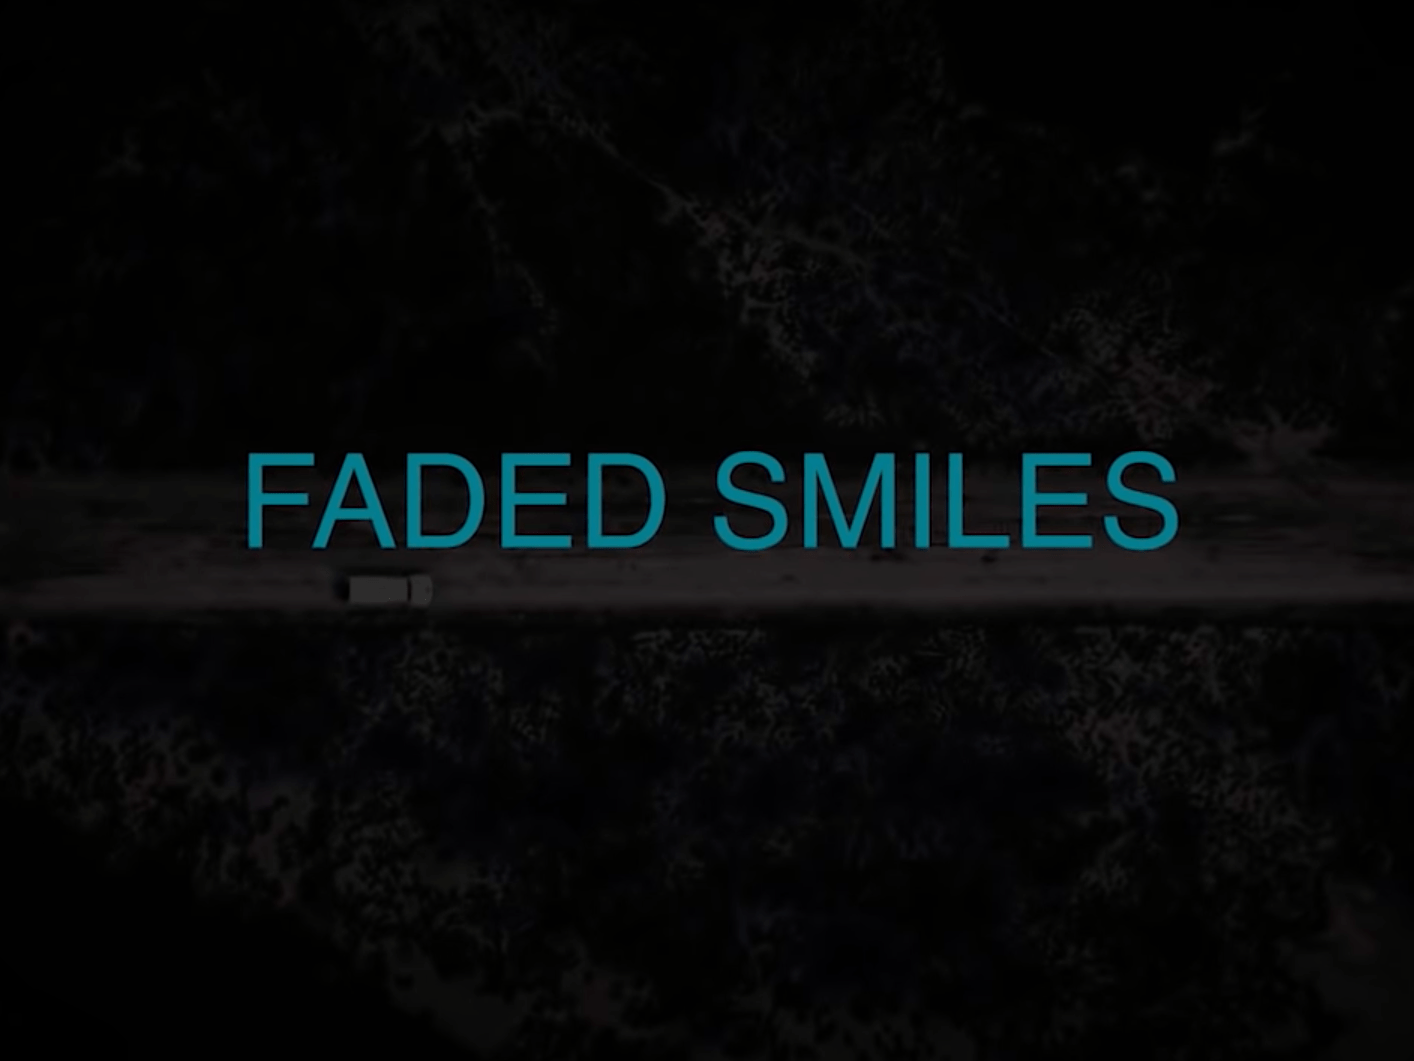 FADED SMILES NollywoodGuide.us